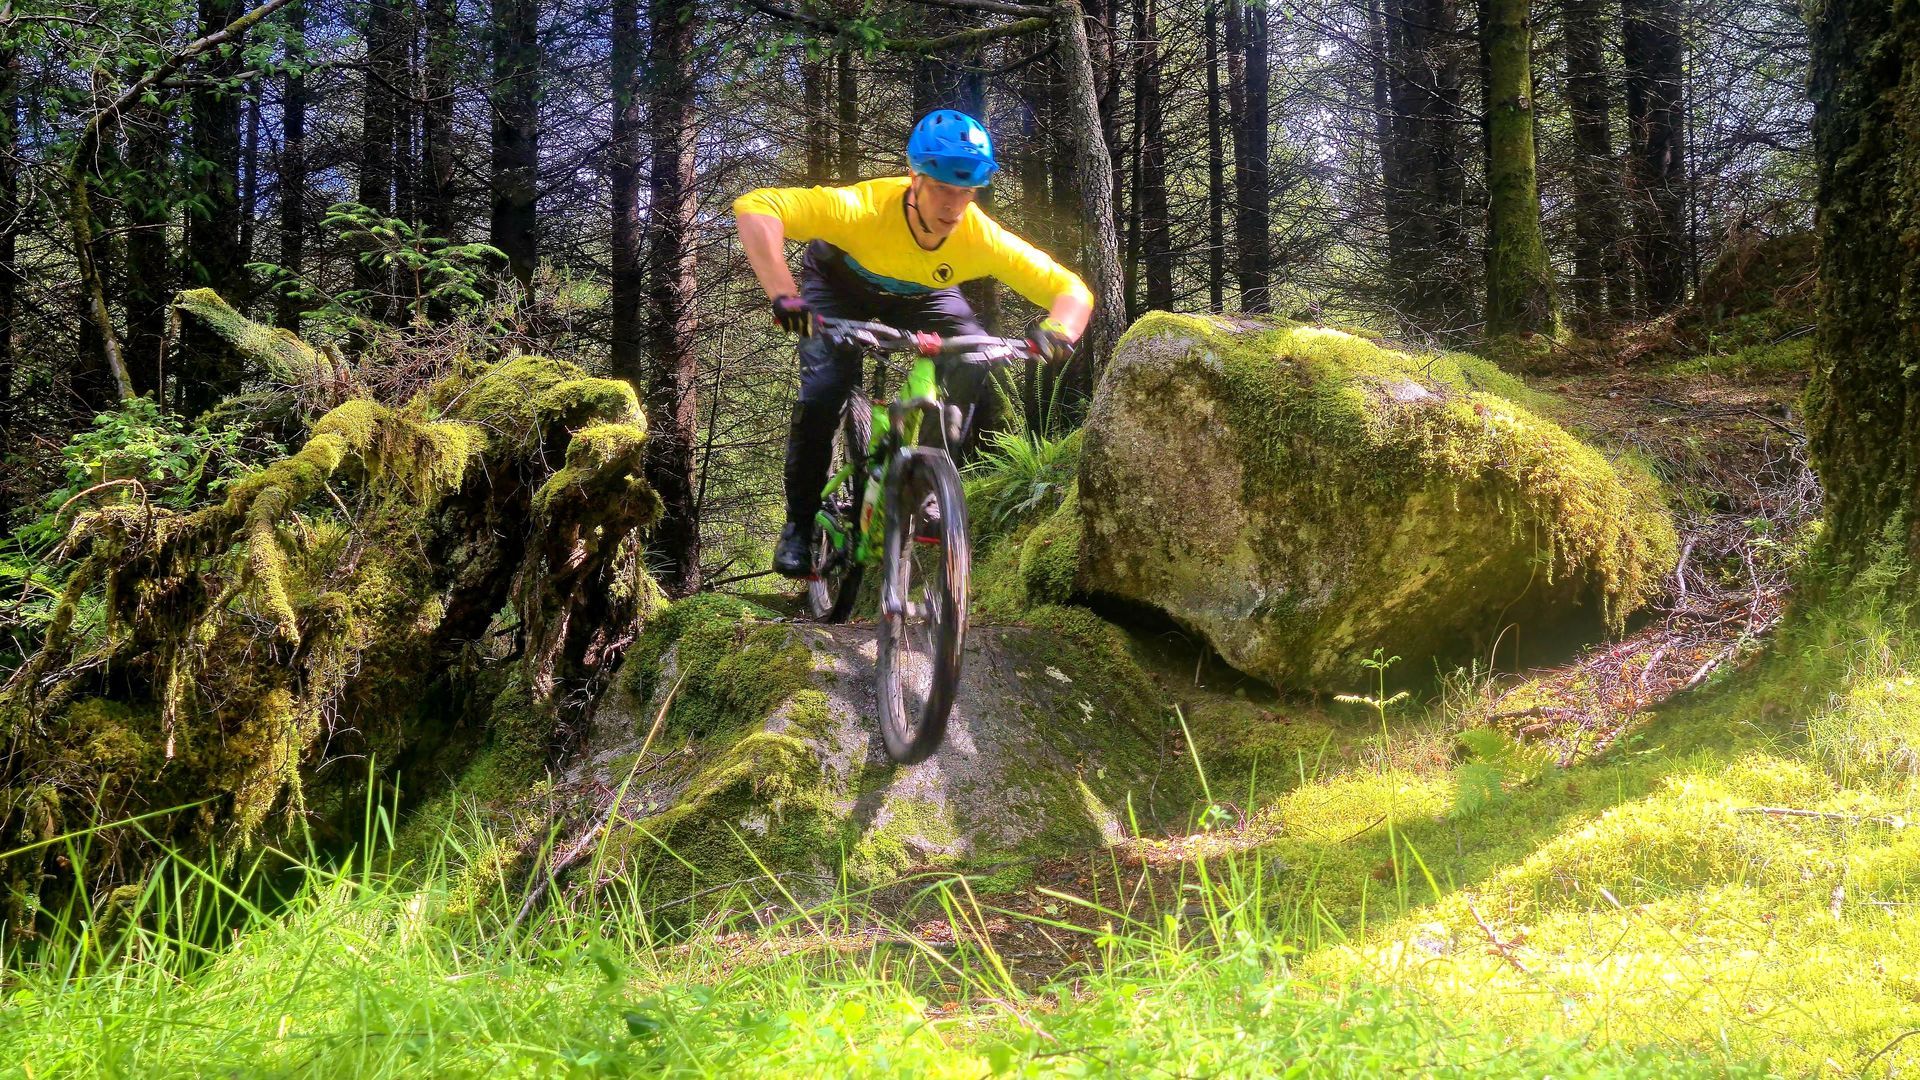 MTB Guide and Coach - Fort William, Scotland.